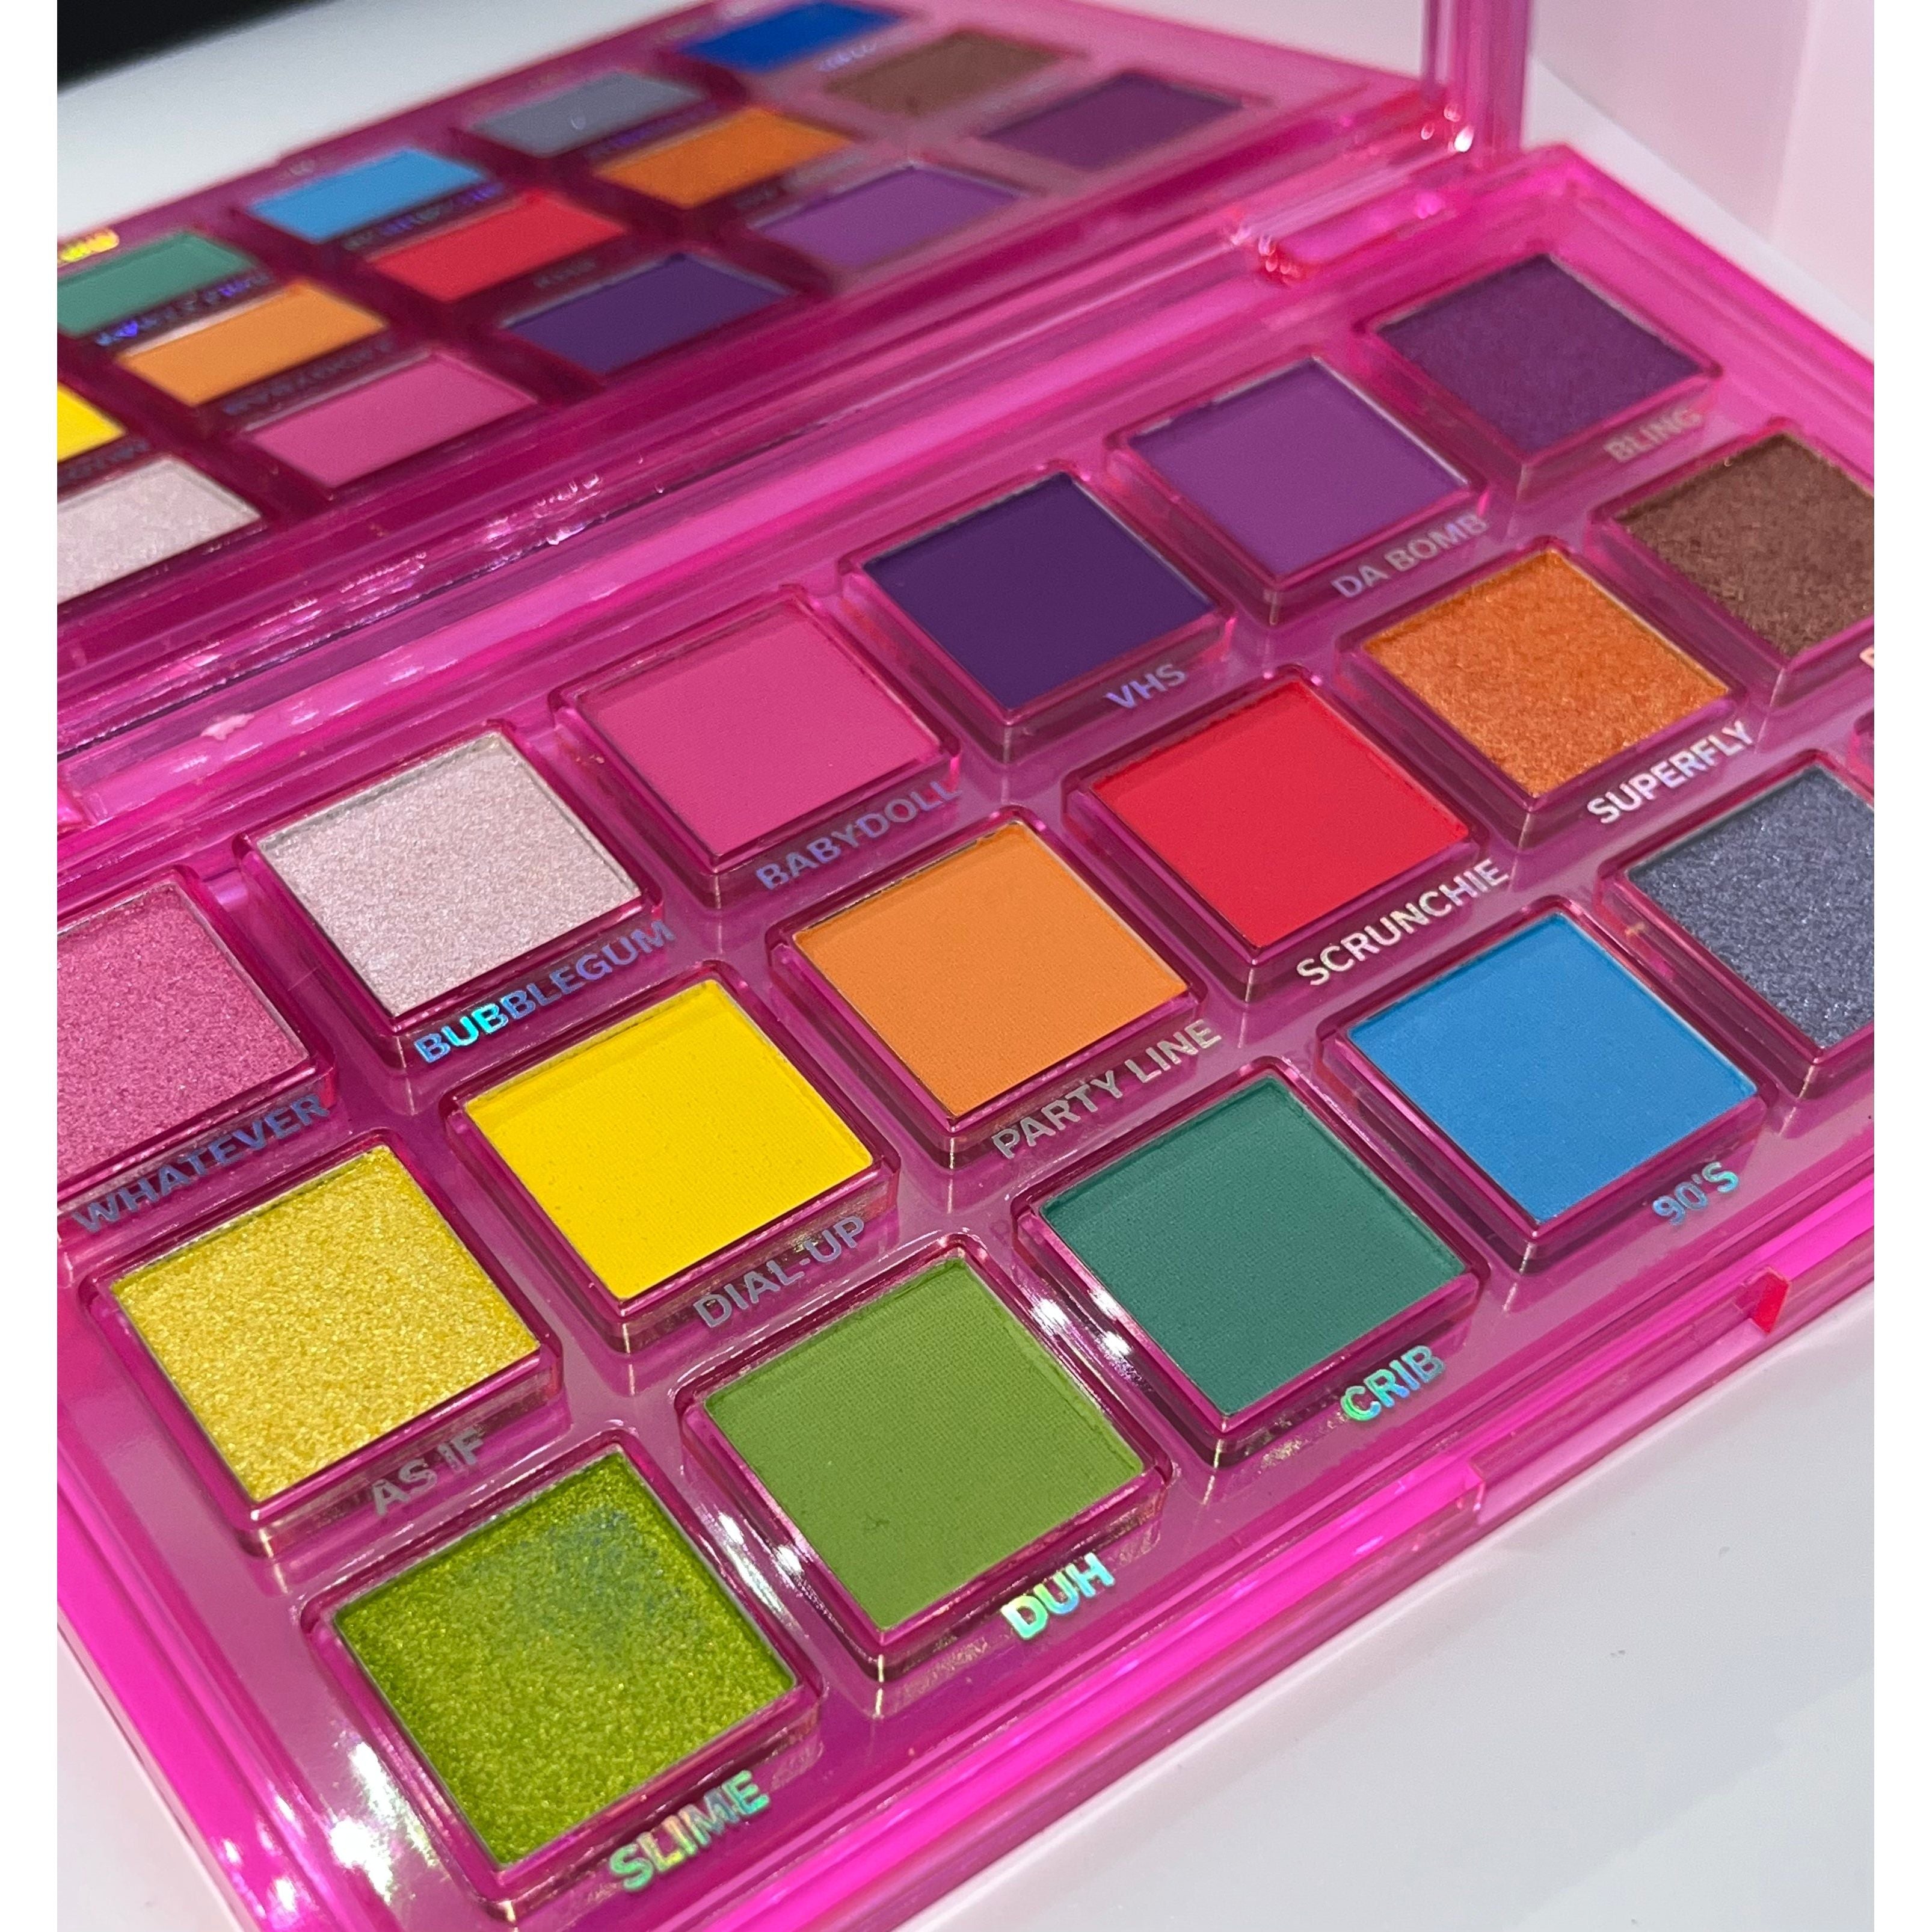 90s Whatever 4ever Eyeshadow Palette